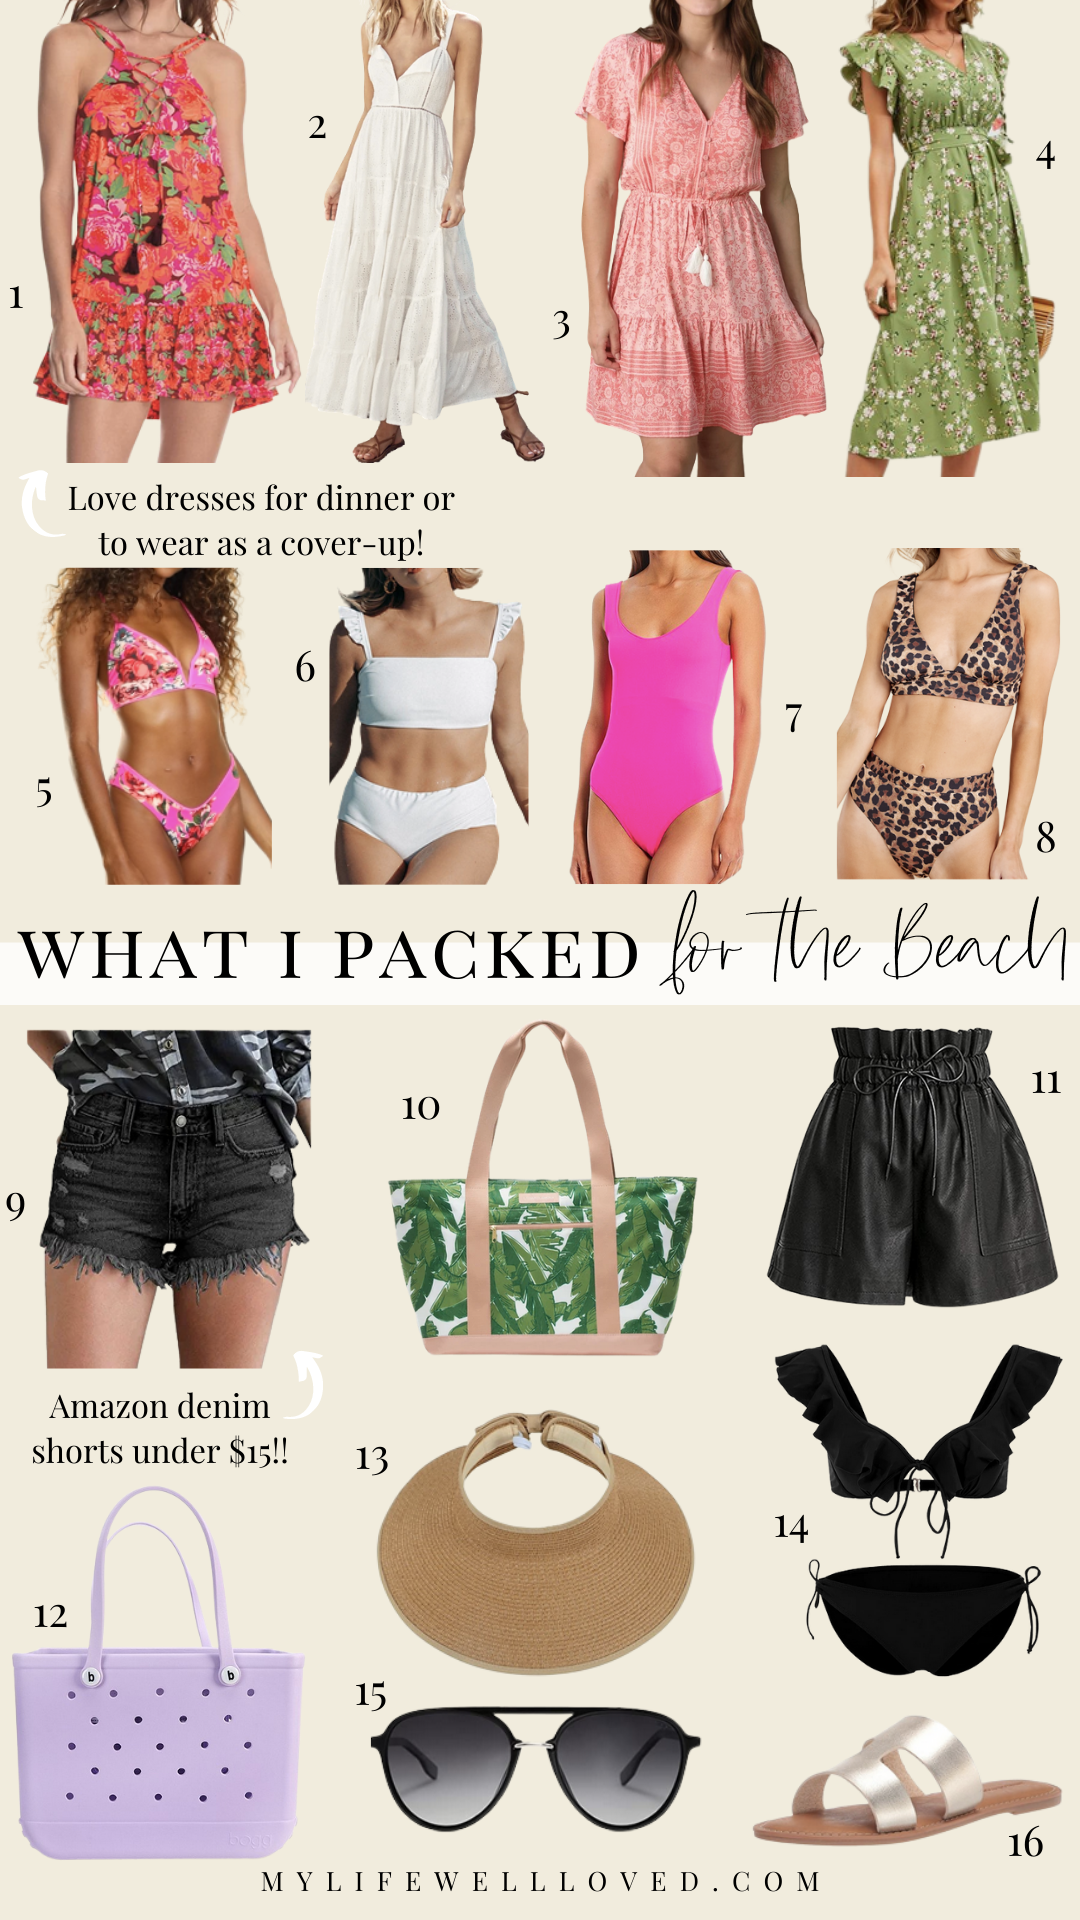 Vacation Style: Best Beach Wear For Moms - Healthy By Heather Brown